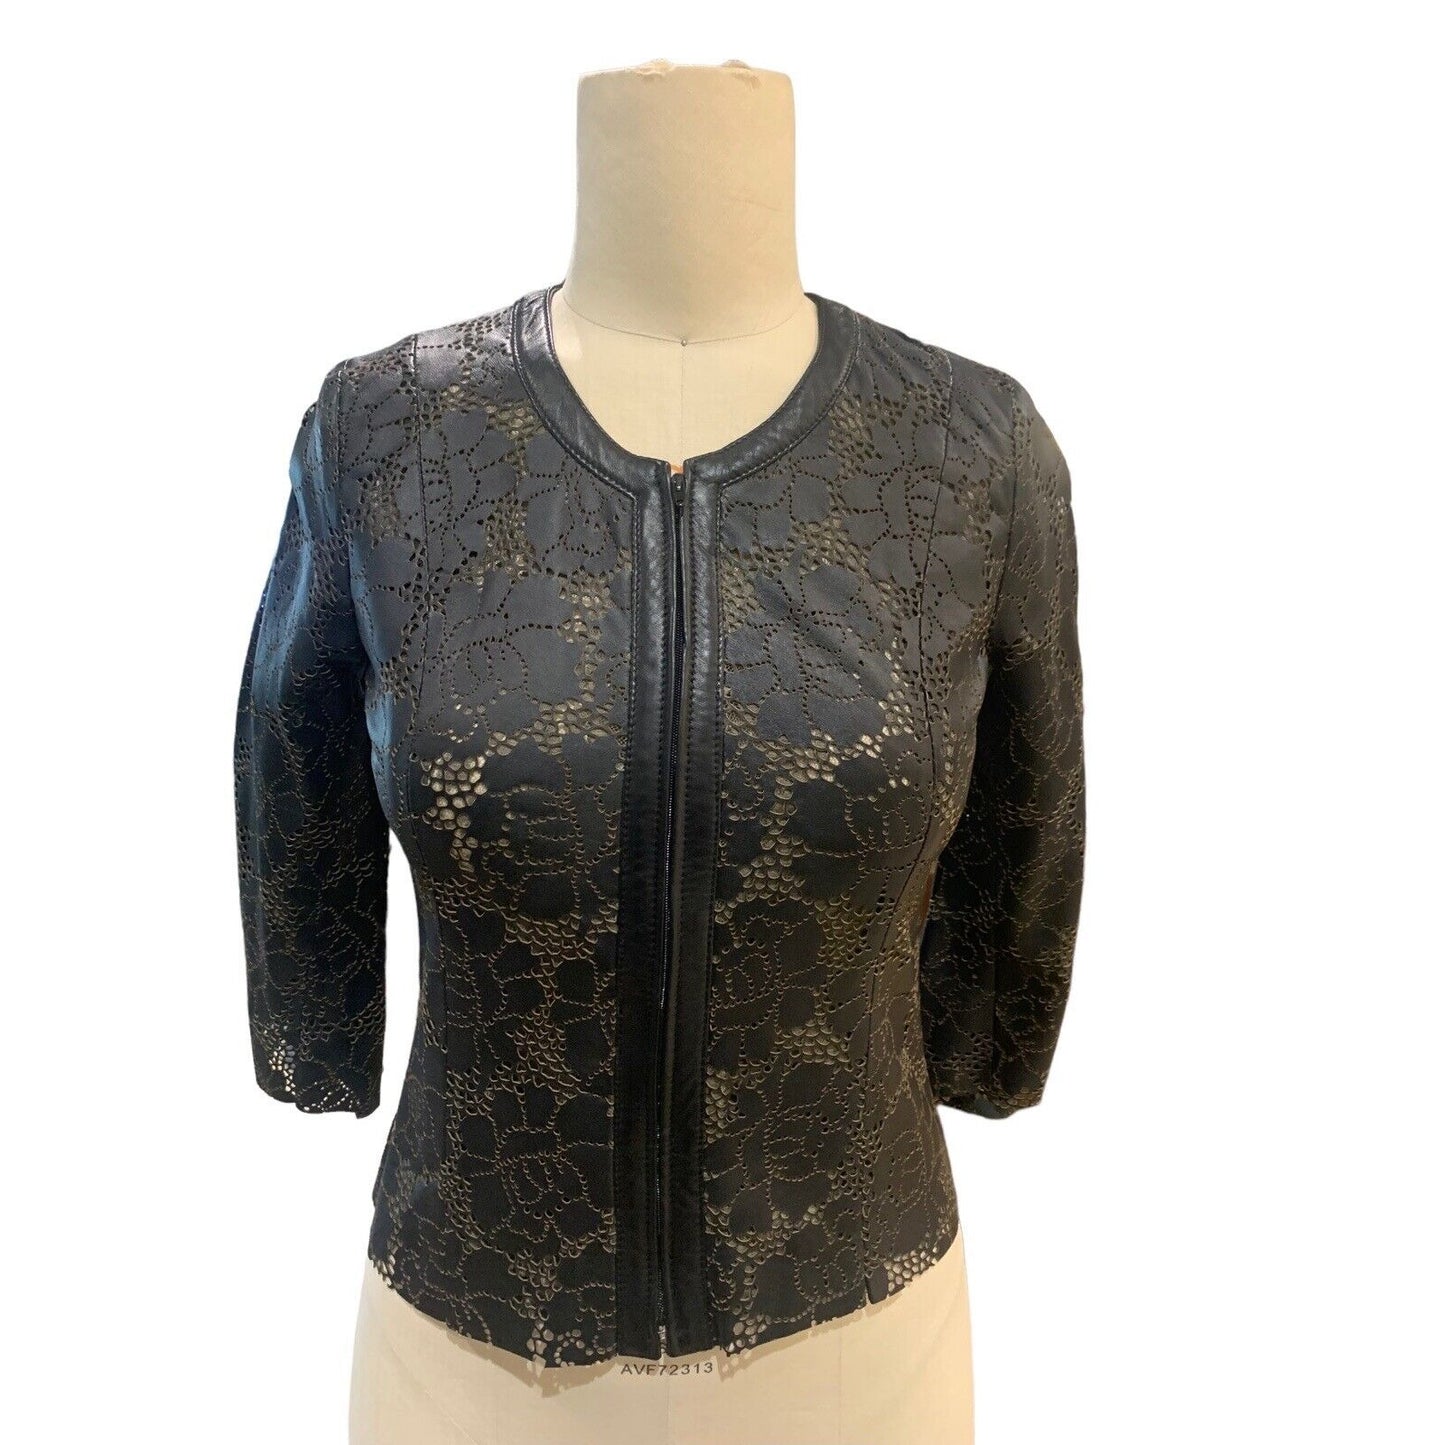 Canipelle Nappa Leather Floral Perforated Shirt Jacket